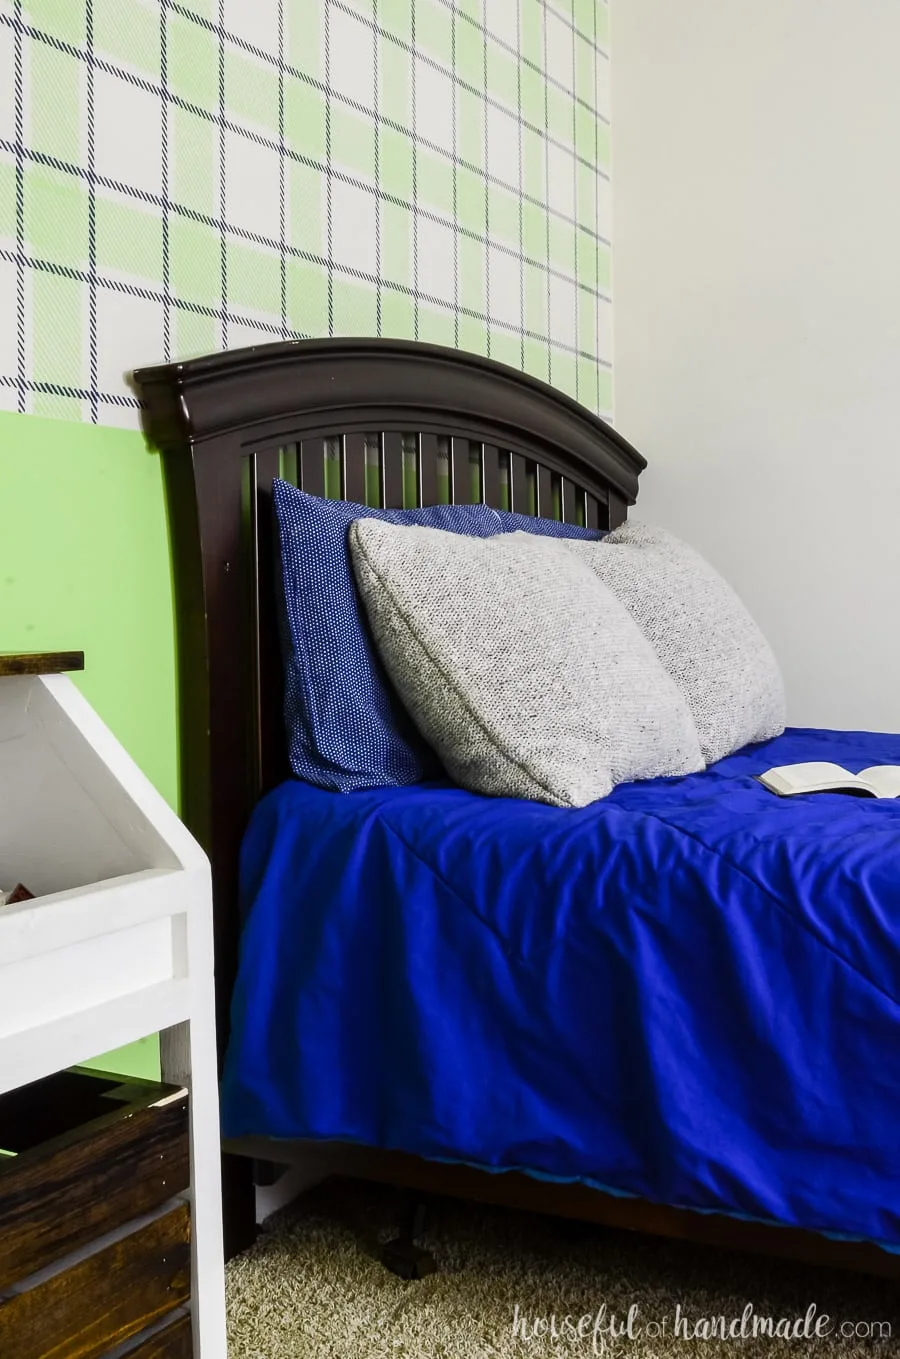 Dark wood craftsman headboard in a boys bedroom. Blue bedding with a green plaid wall design on the back wall.